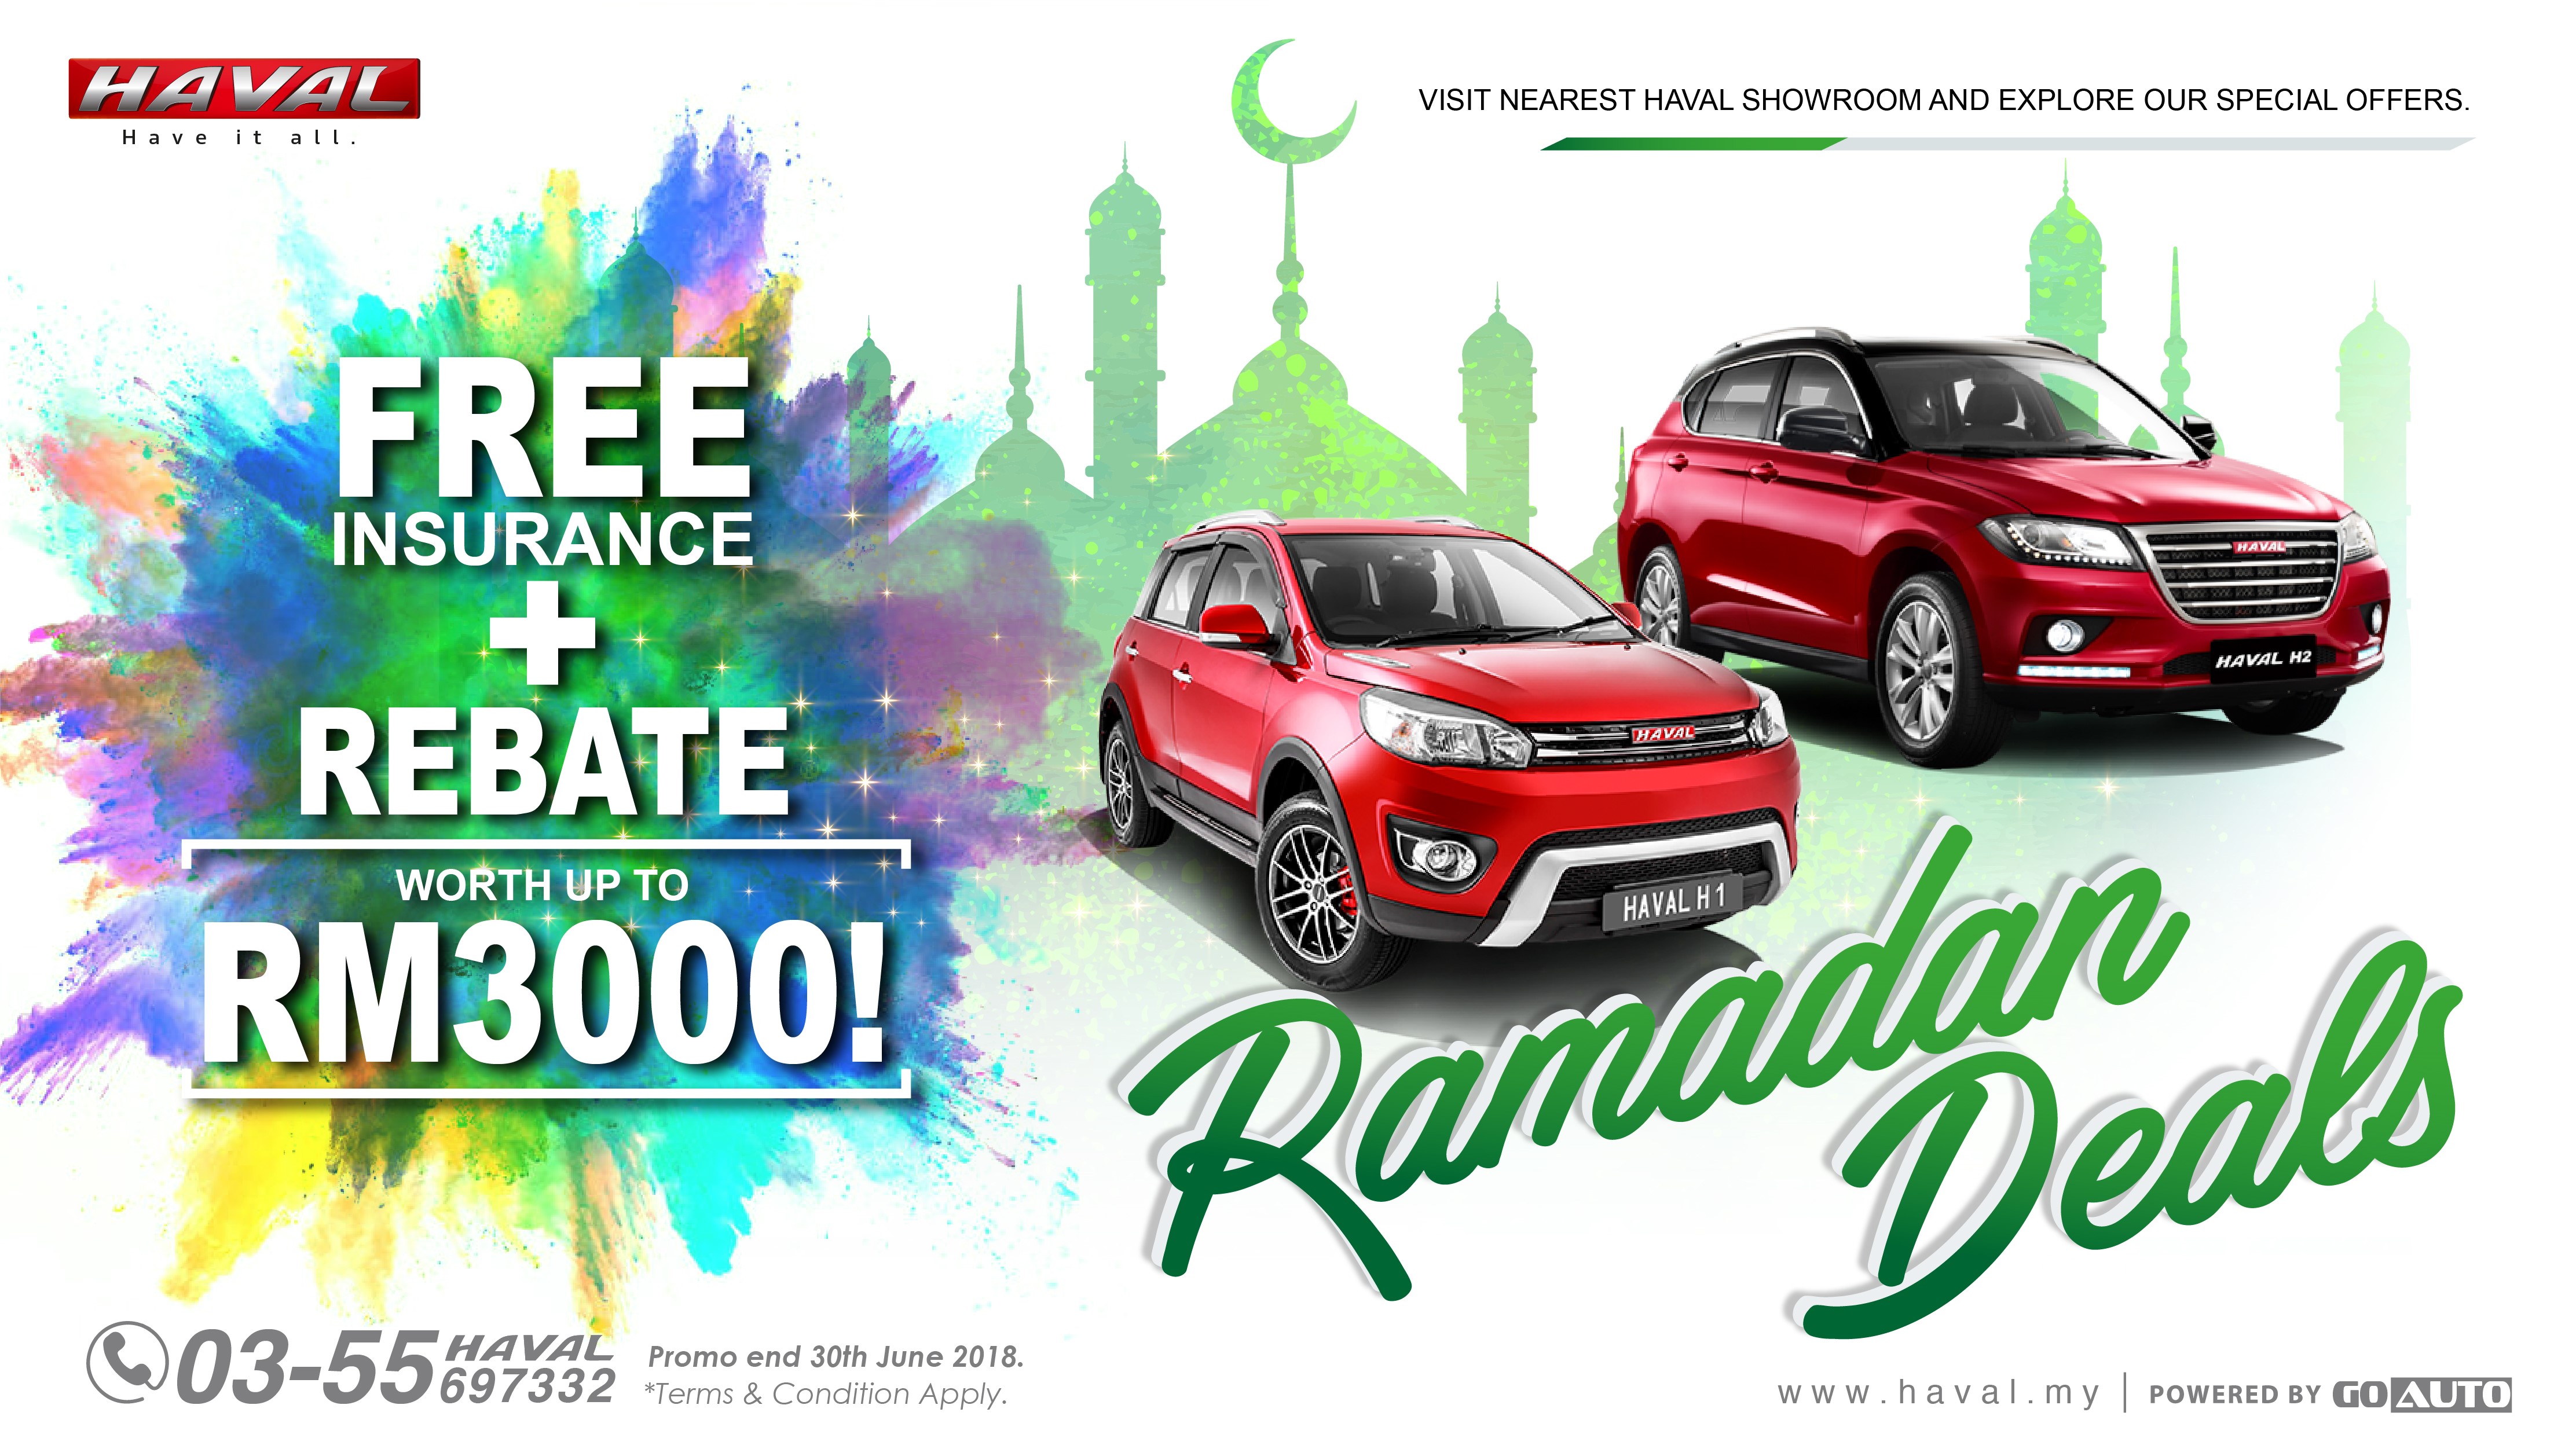 Haval Malaysia Announces Ramadan 2018 Deals News And Reviews On Malaysian Cars Motorcycles And Automotive Lifestyle